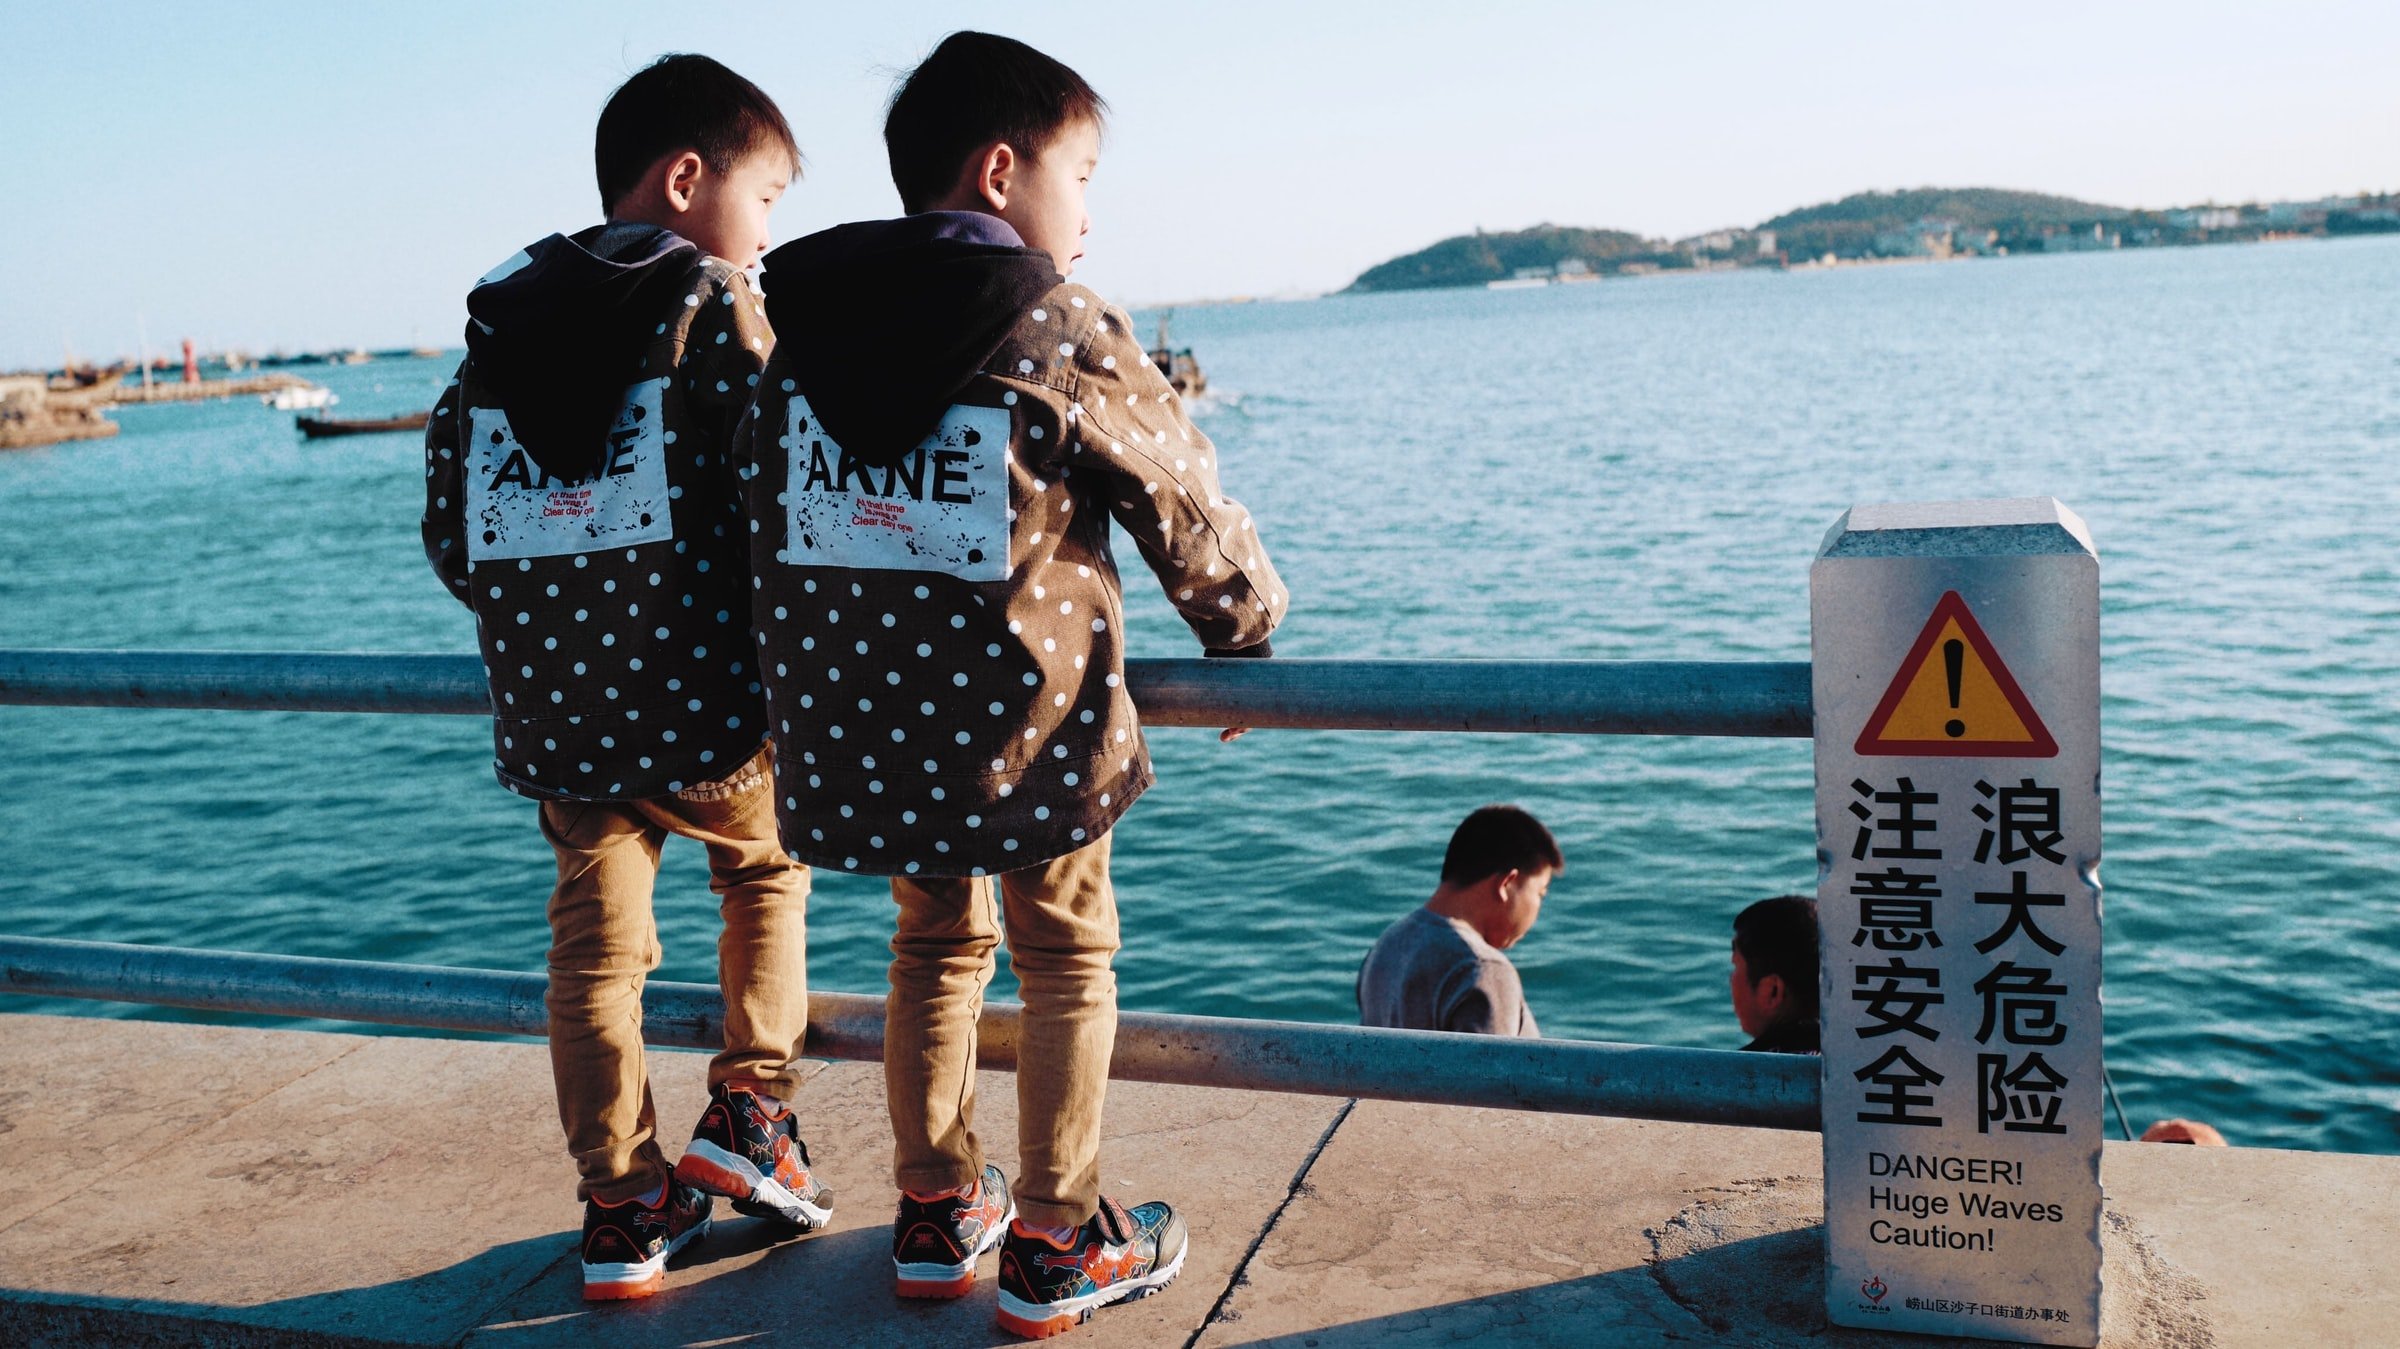 Twin boys standing by the lake. | Source: Unsplash